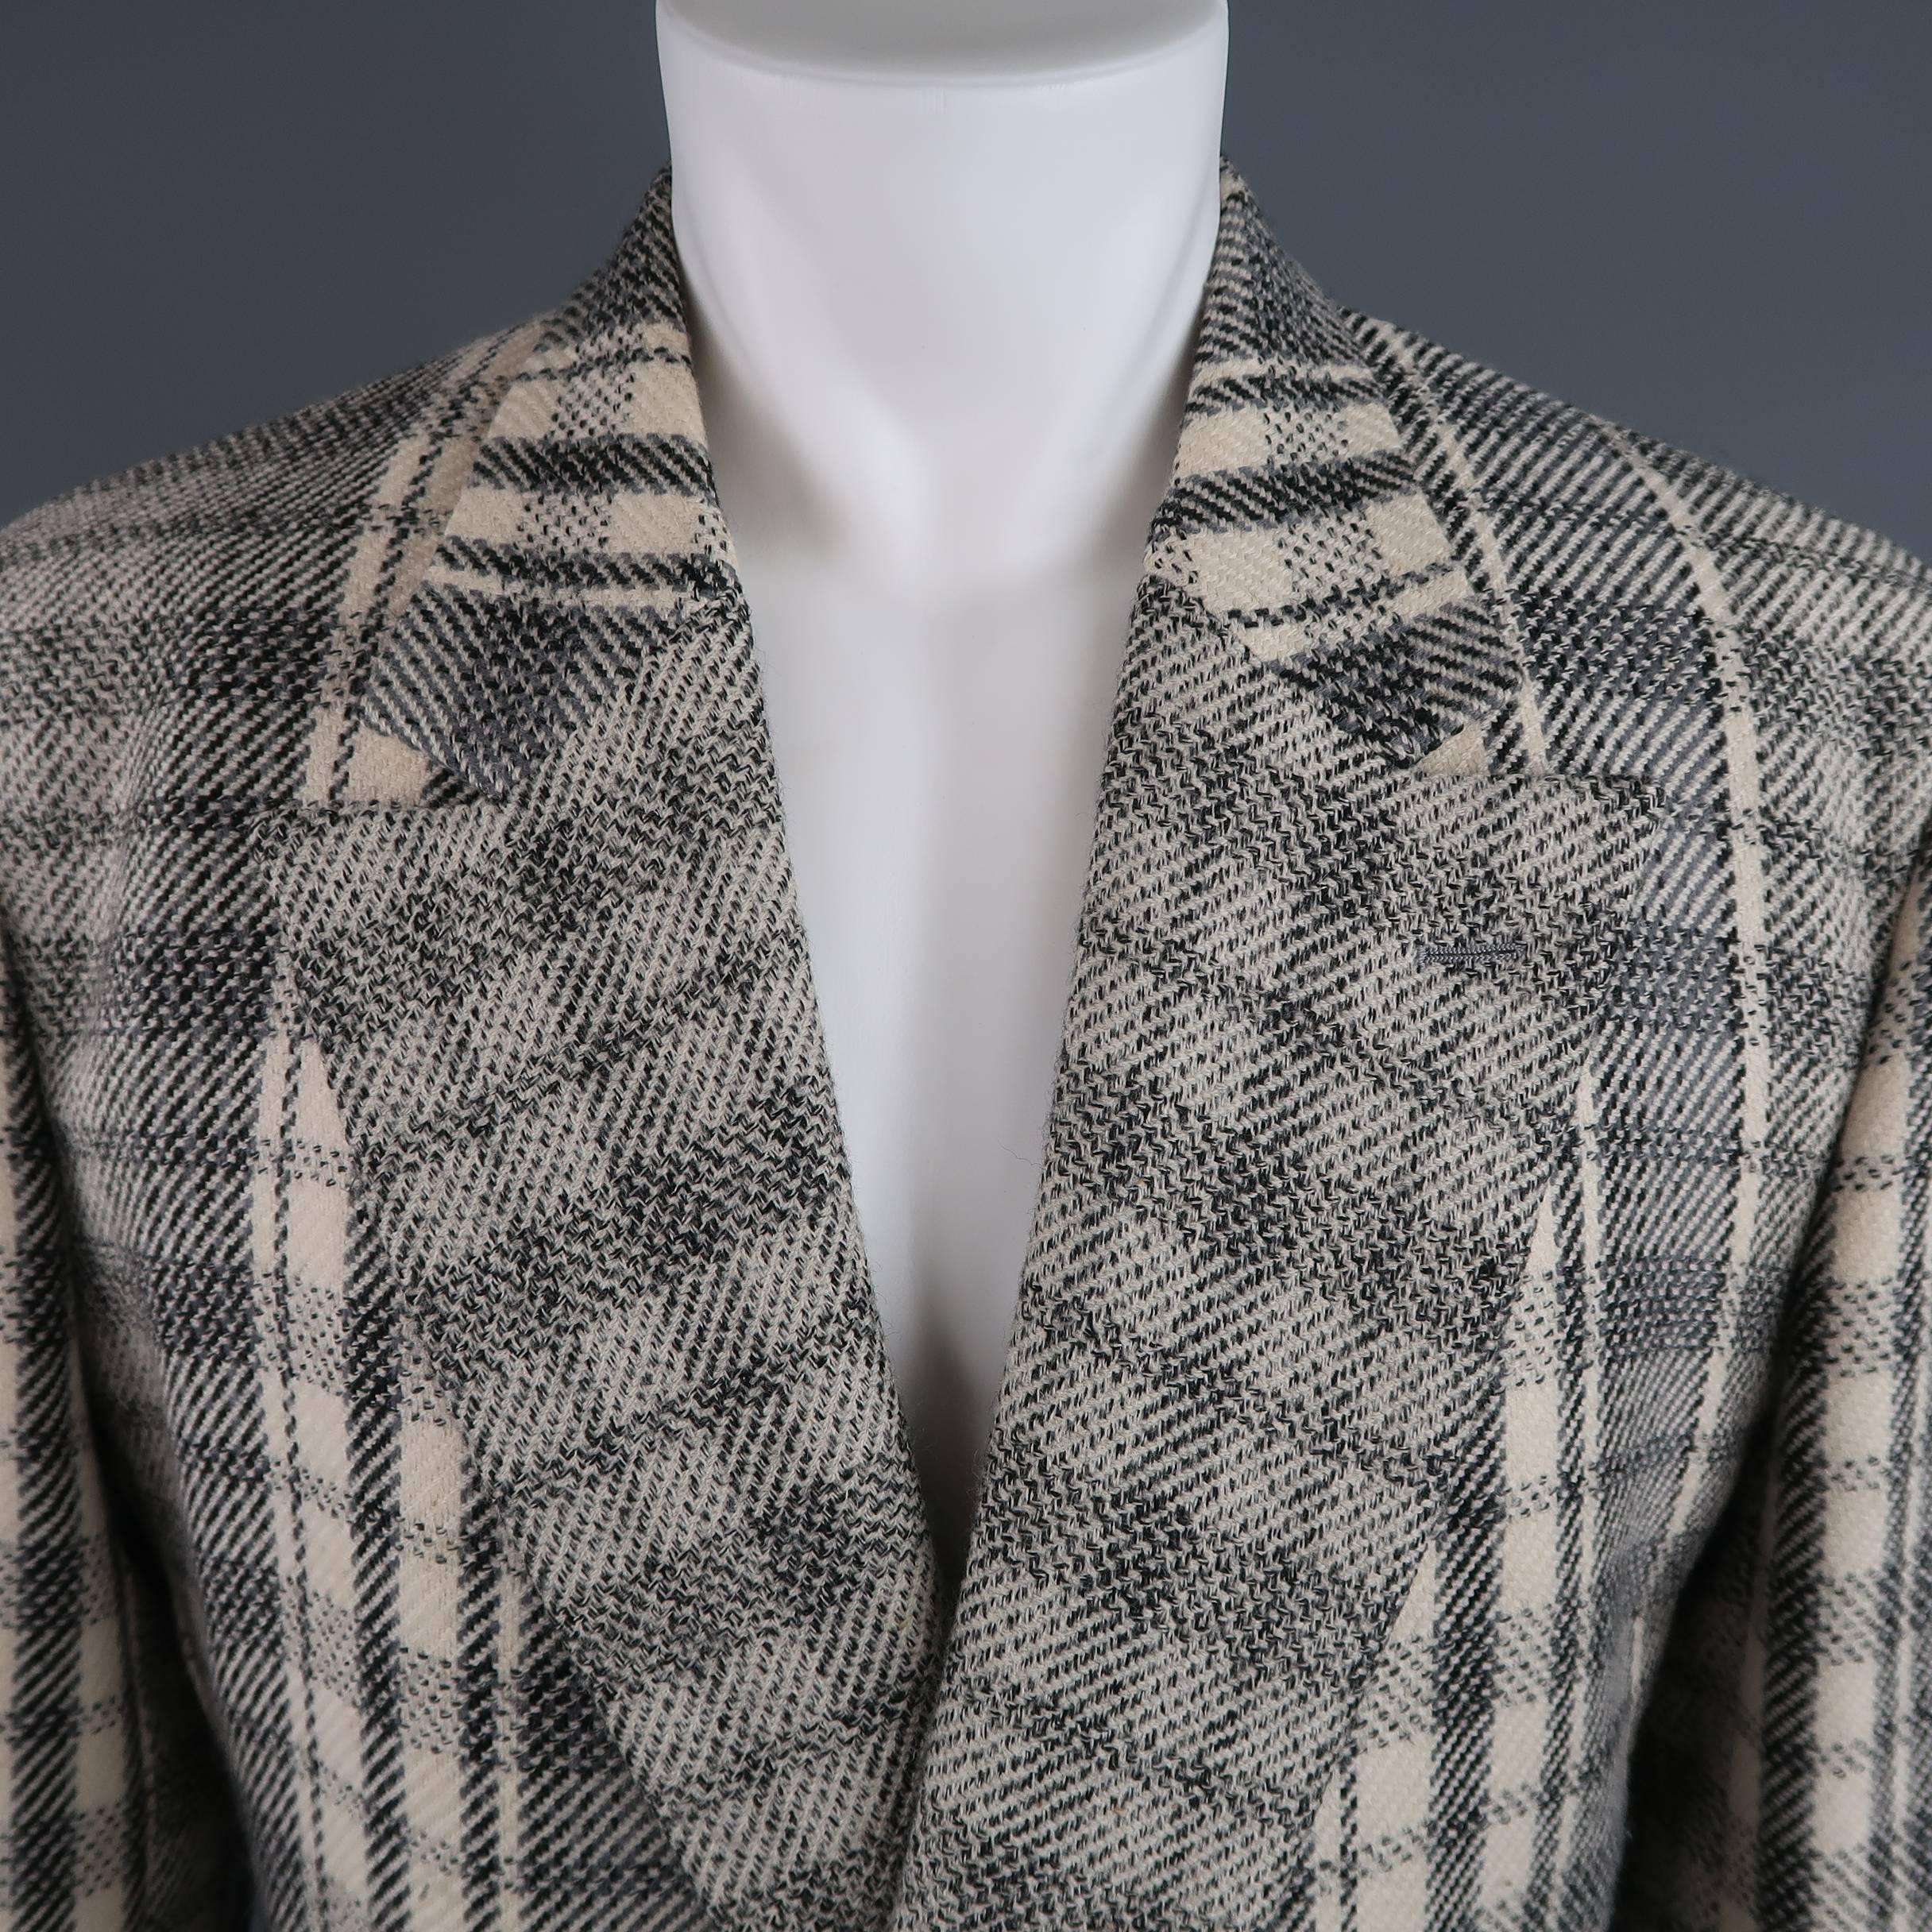 This vintage 1980's GIANNI VERSACE sport coat comes in a beige and gray plaid wool blend material and features a wide peak lapel, double breasted front with dark gold tone, leather detailed buttons, patch pockets, and functional button cuffs. Wear